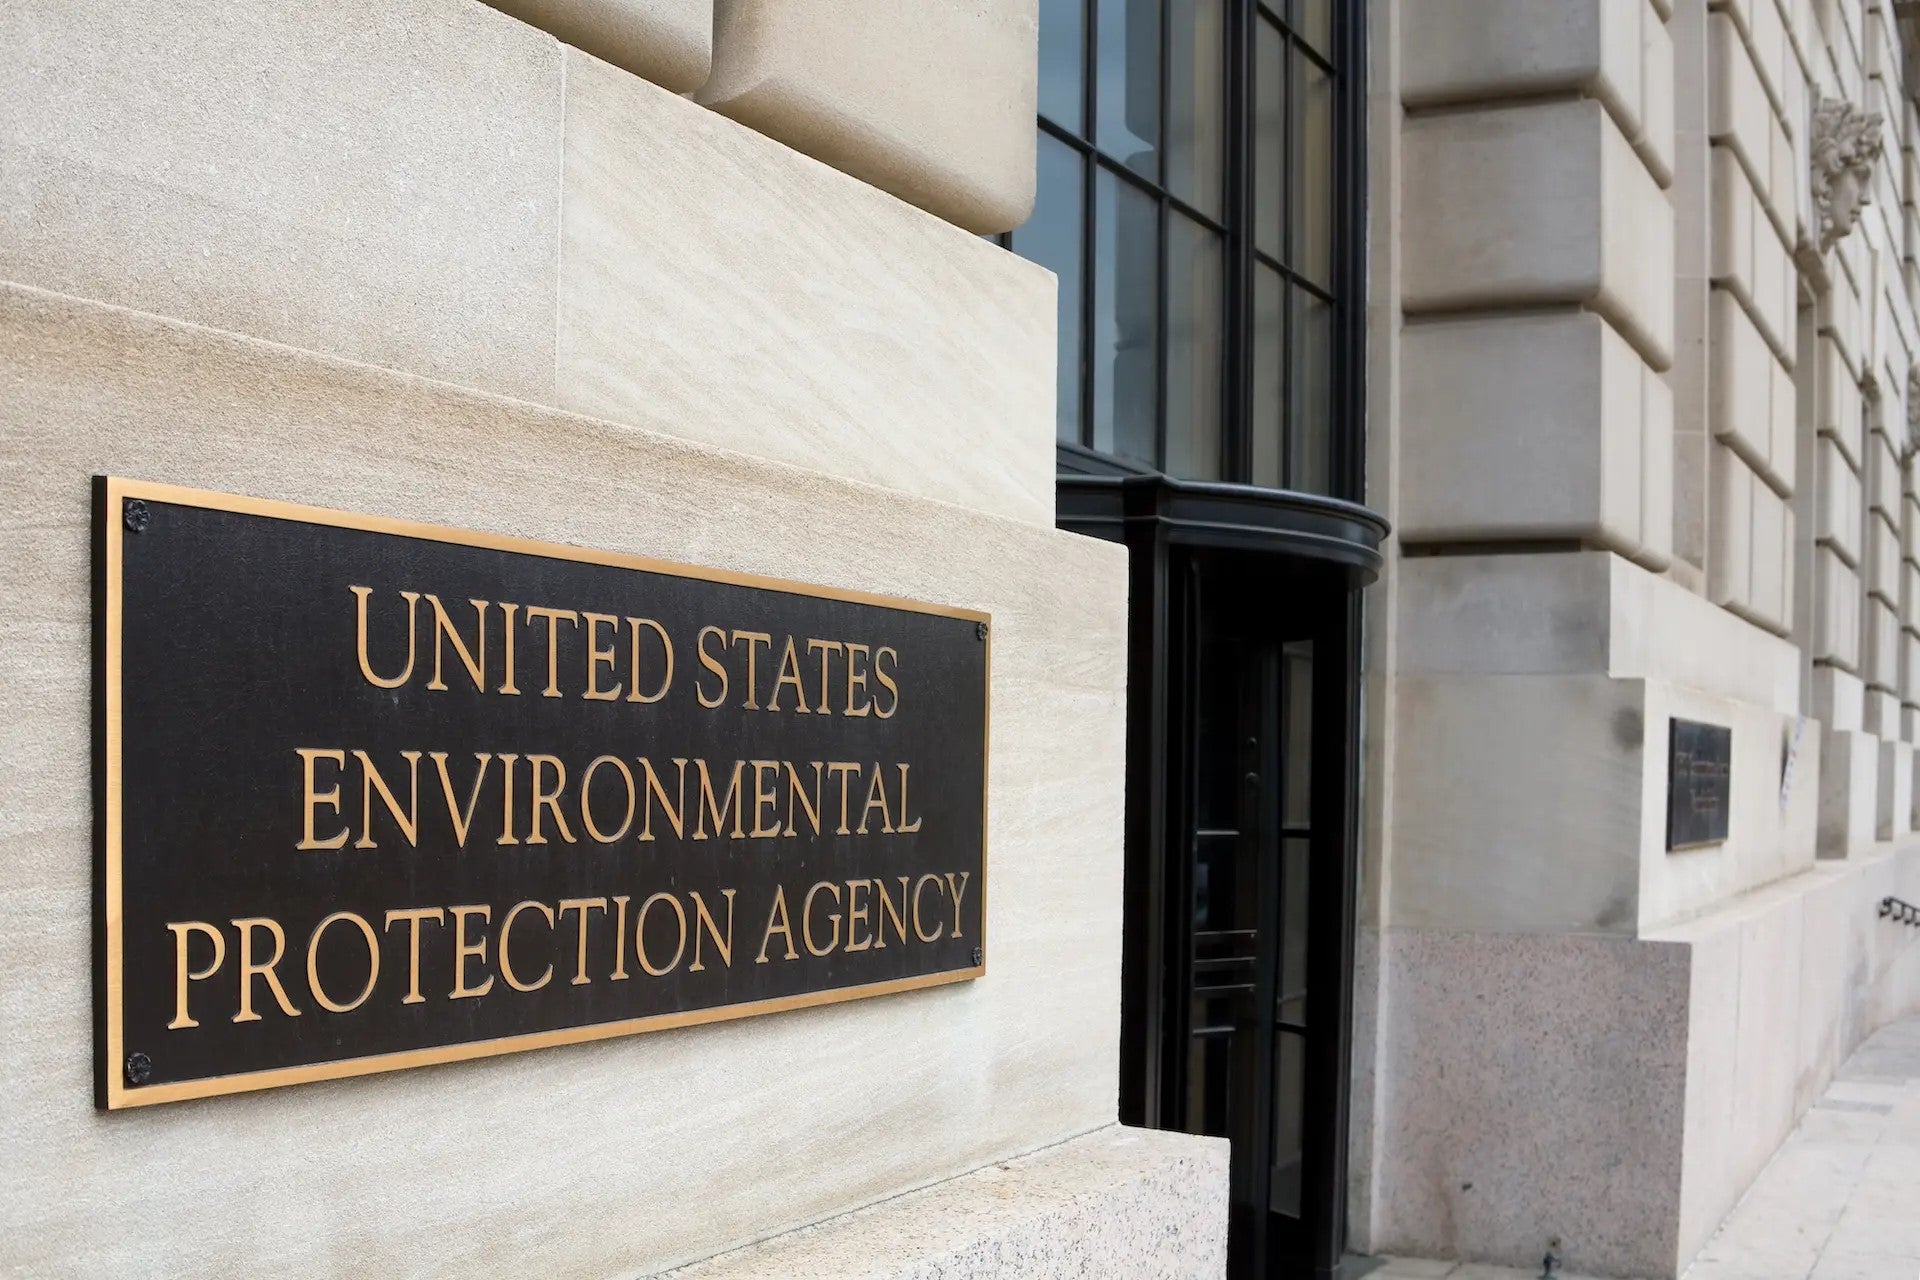 The EPA is being sued by 18 children over alleged climate change mishandling